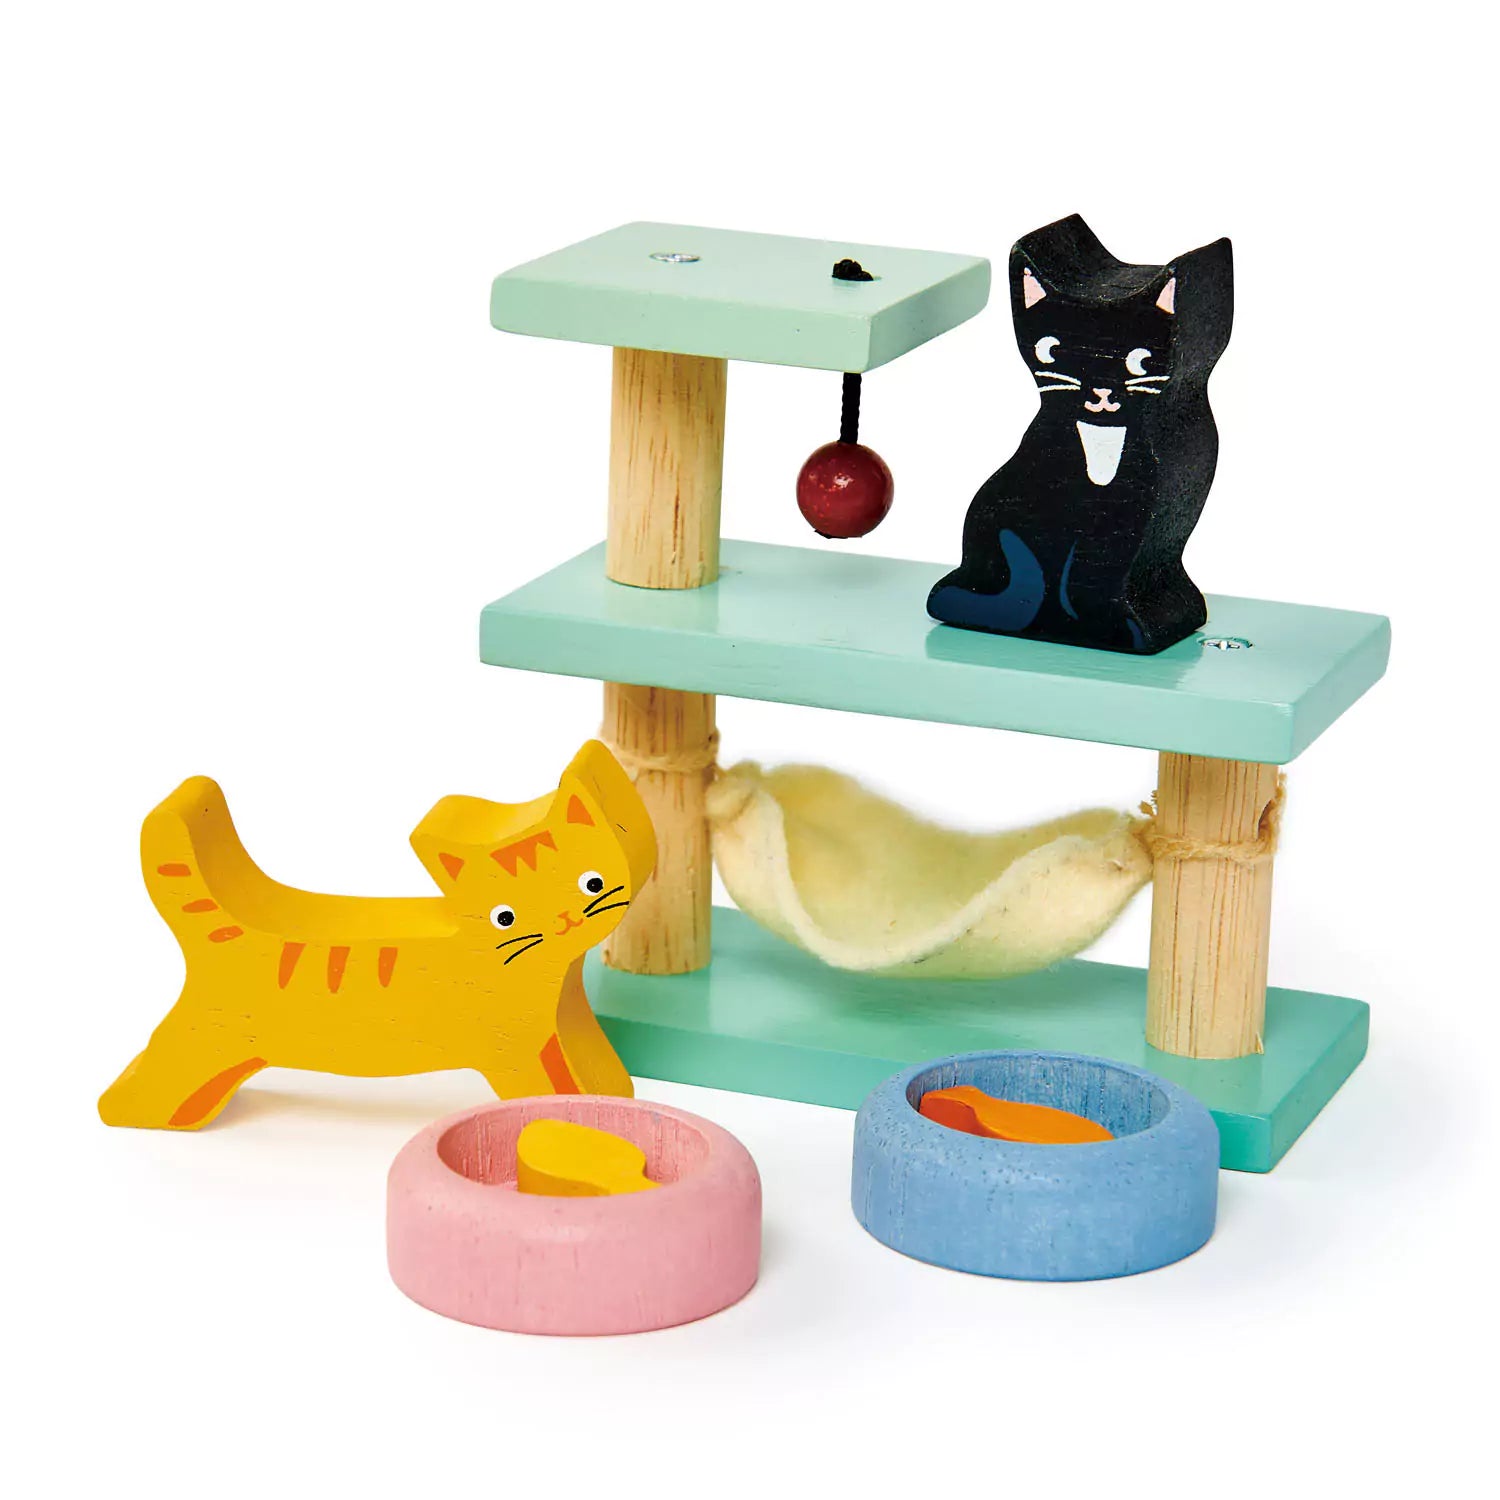 An image of Wooden Toys - Tender Leaf Wooden Cat | Small Smart UK